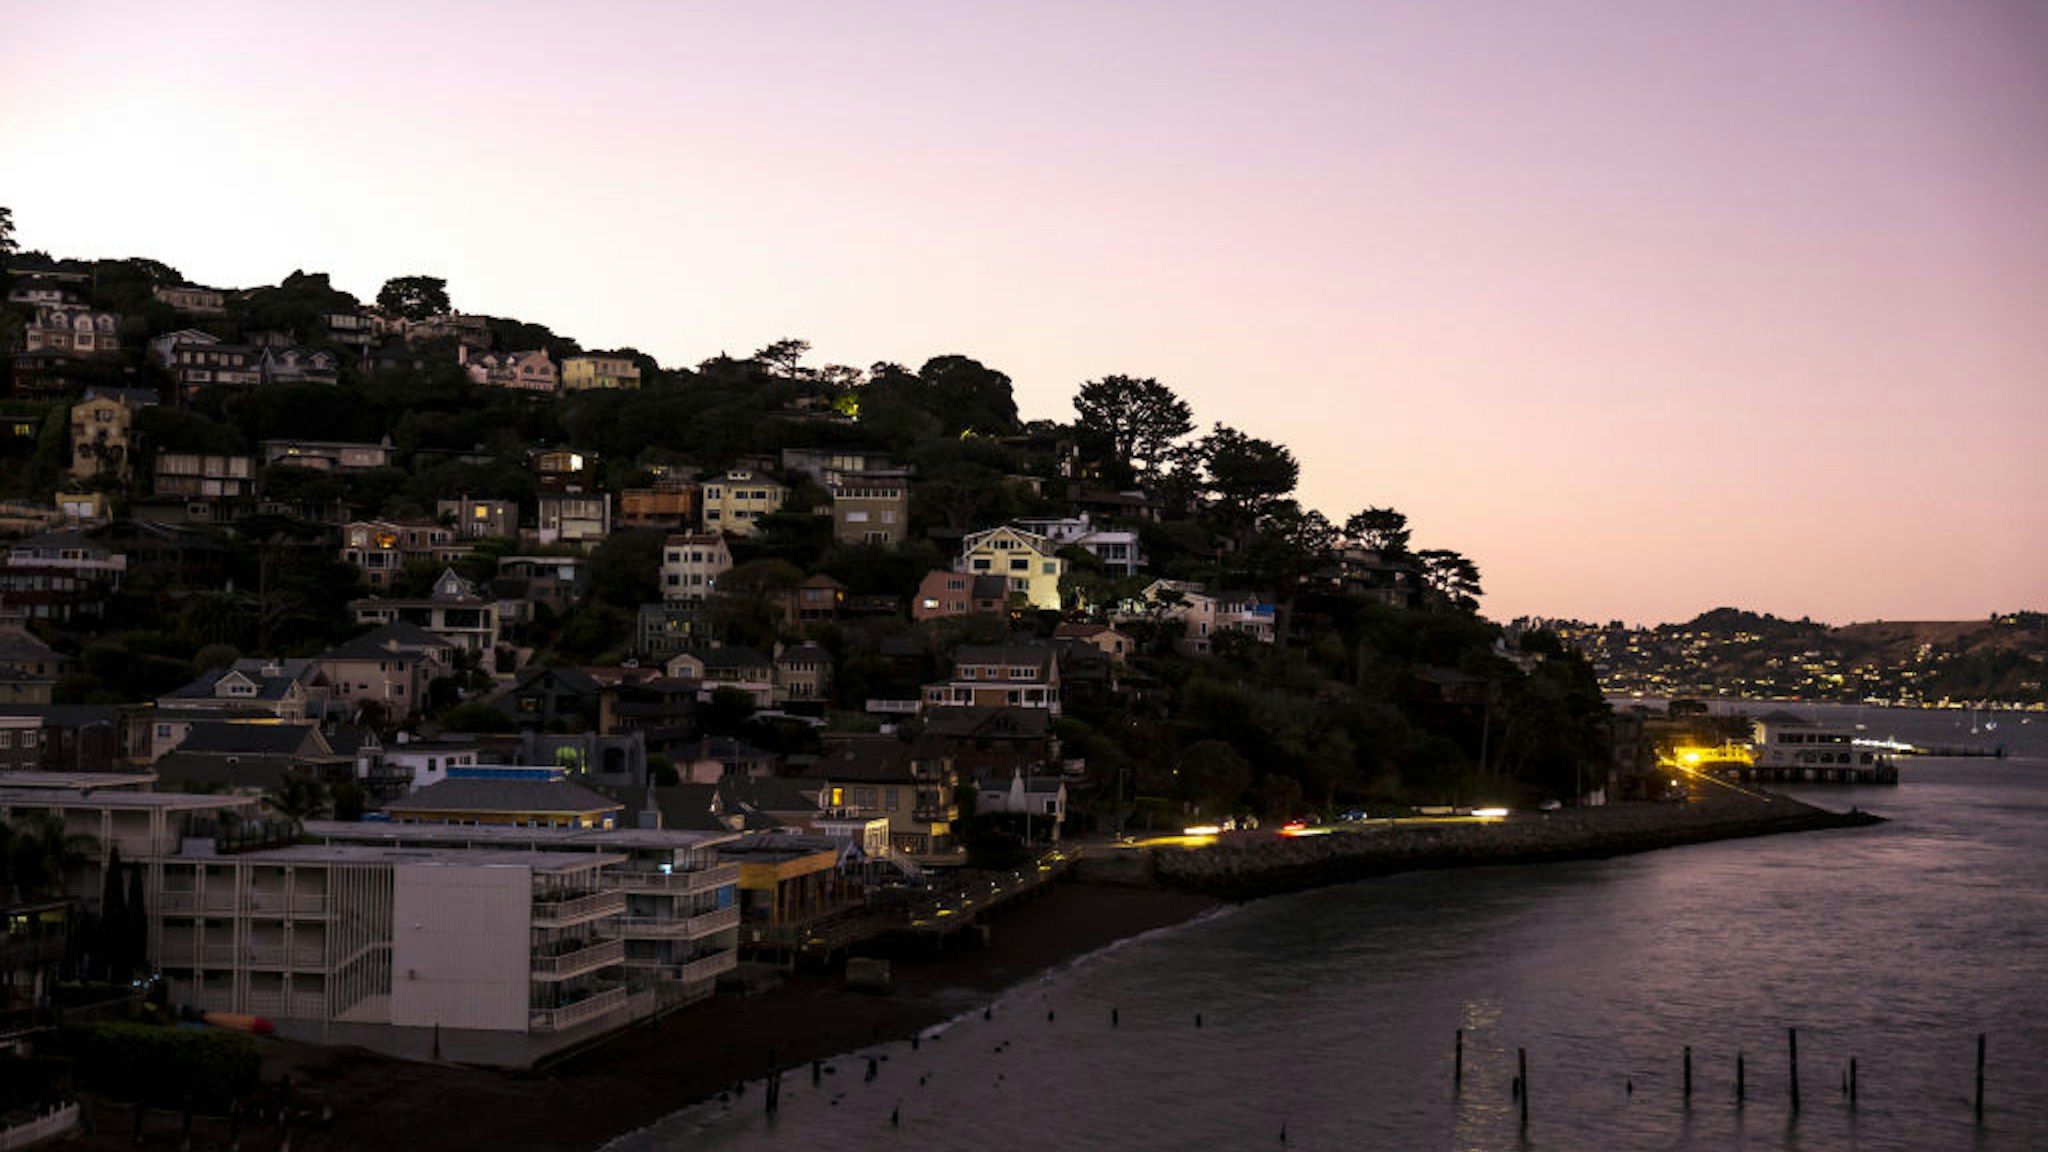 Homes stand during a blackout in Sausalito, California, U.S., on Tuesday, Oct. 29, 2019.